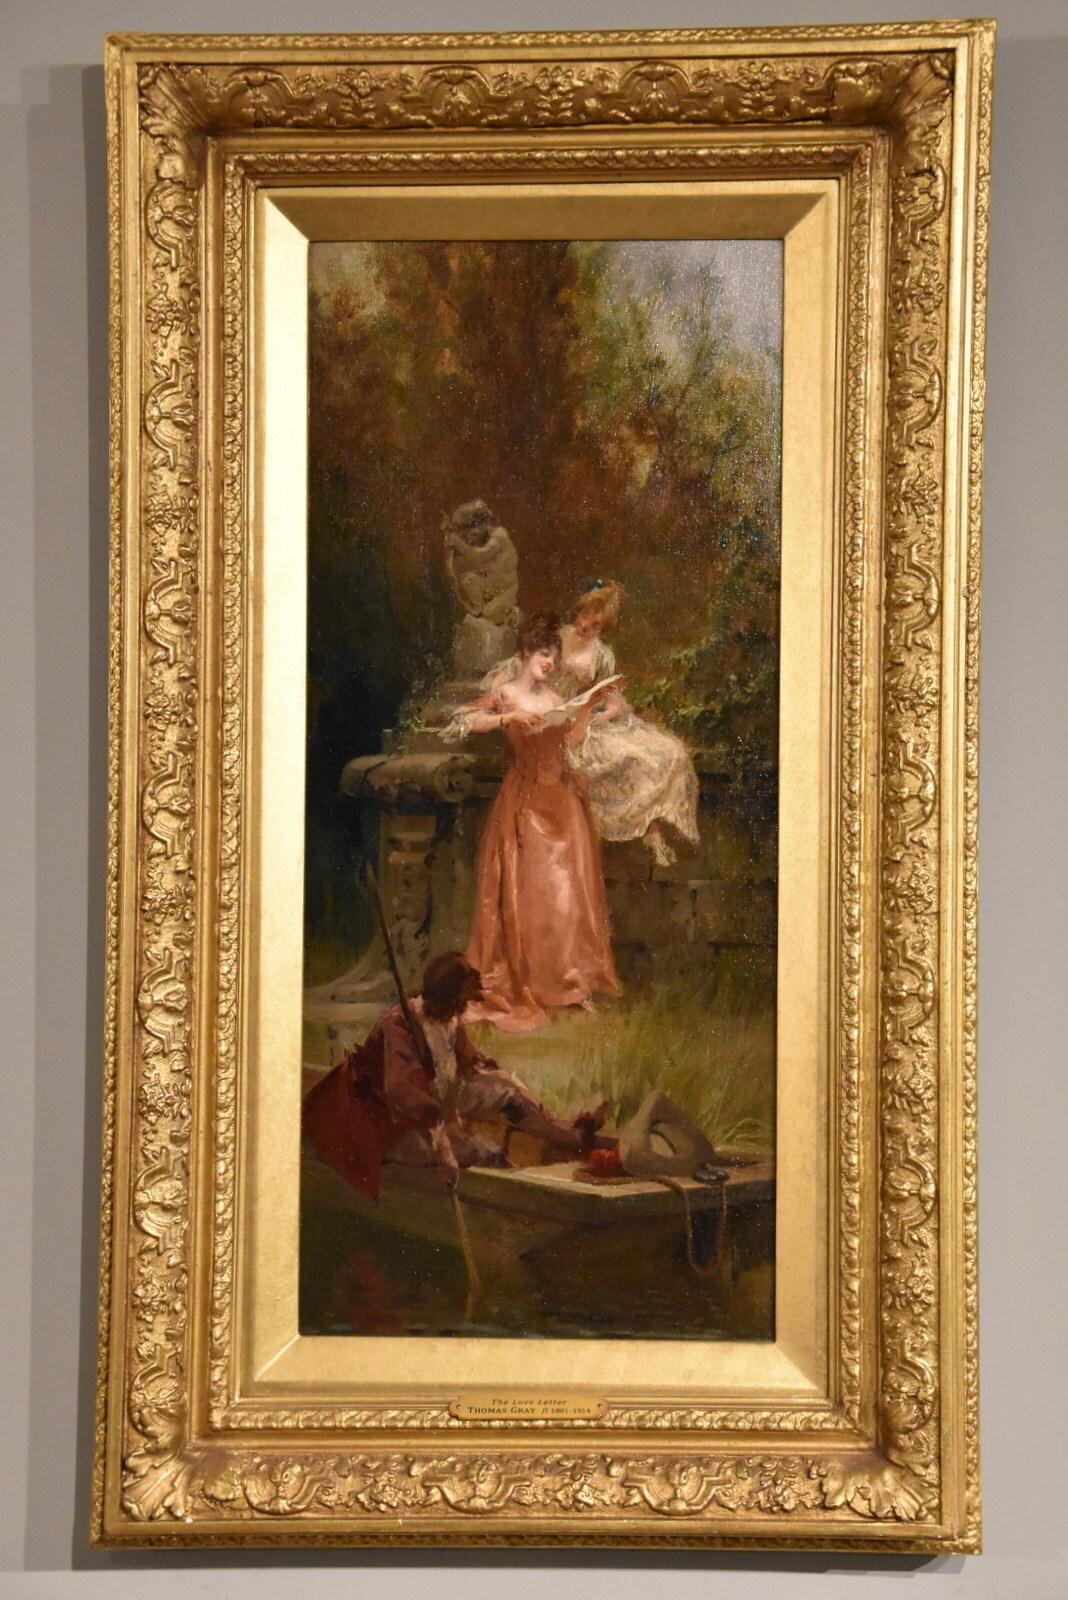 Oil painting Pair by Thomas Gray “The Love Letter” and “The Serenade”. Thomas Gray flourished 1881 – 1914. Figure and domestic painter from London he exhibited at the Royal Academy . Royal Institute and Liverpool. Both Oil on canvas, signed and